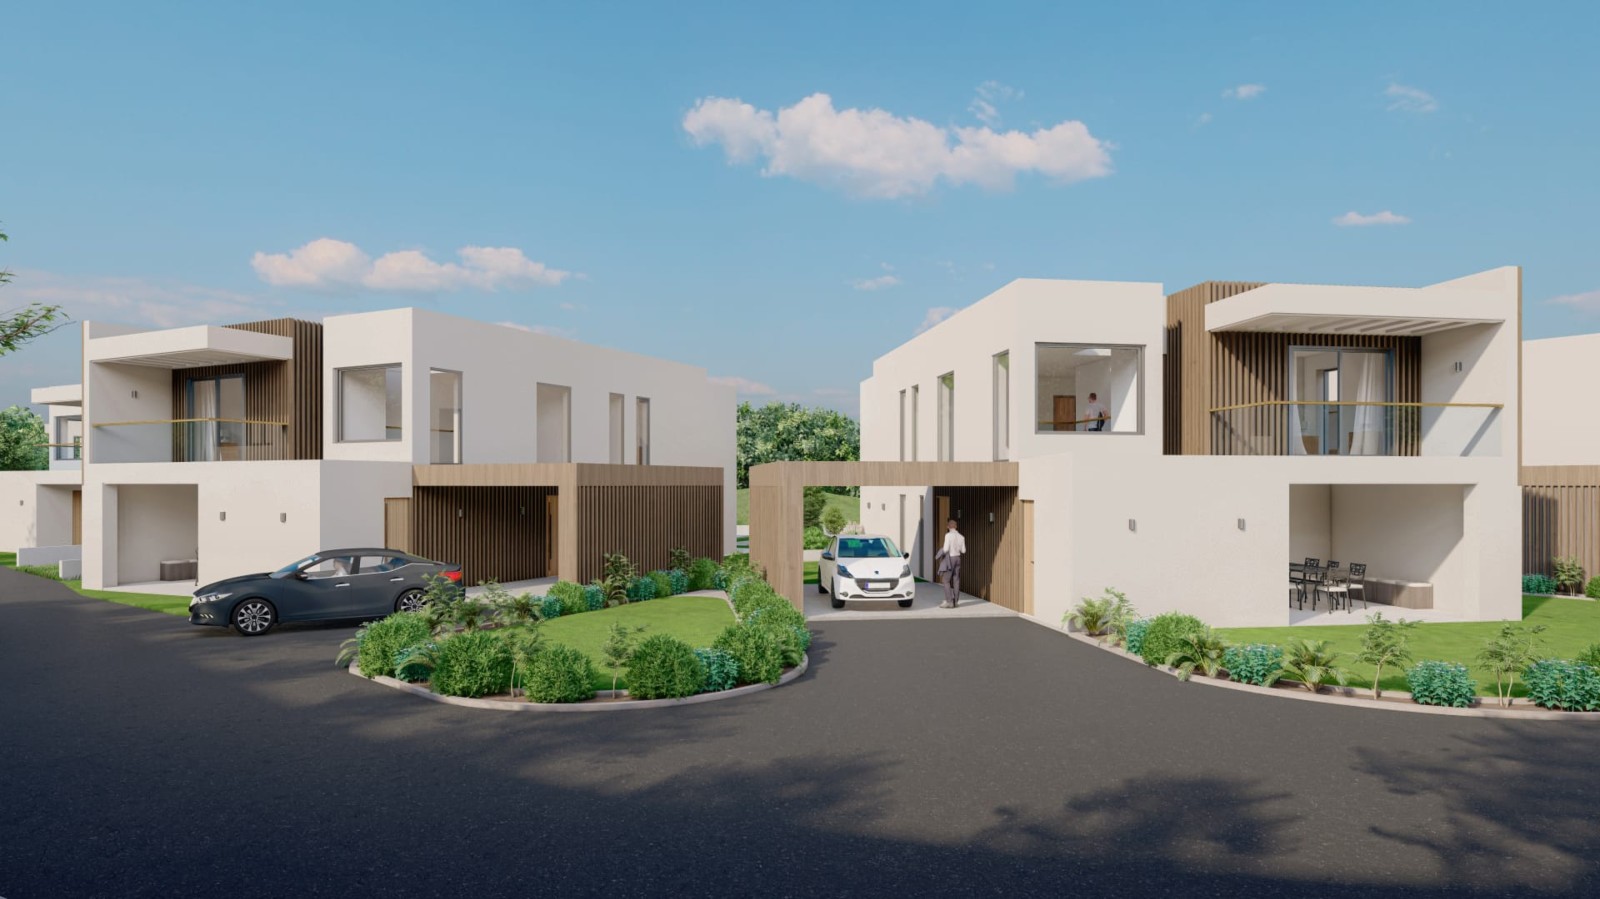 4 bedroom villas for construction with pool, for sale in Albufeira, Algarve_233622